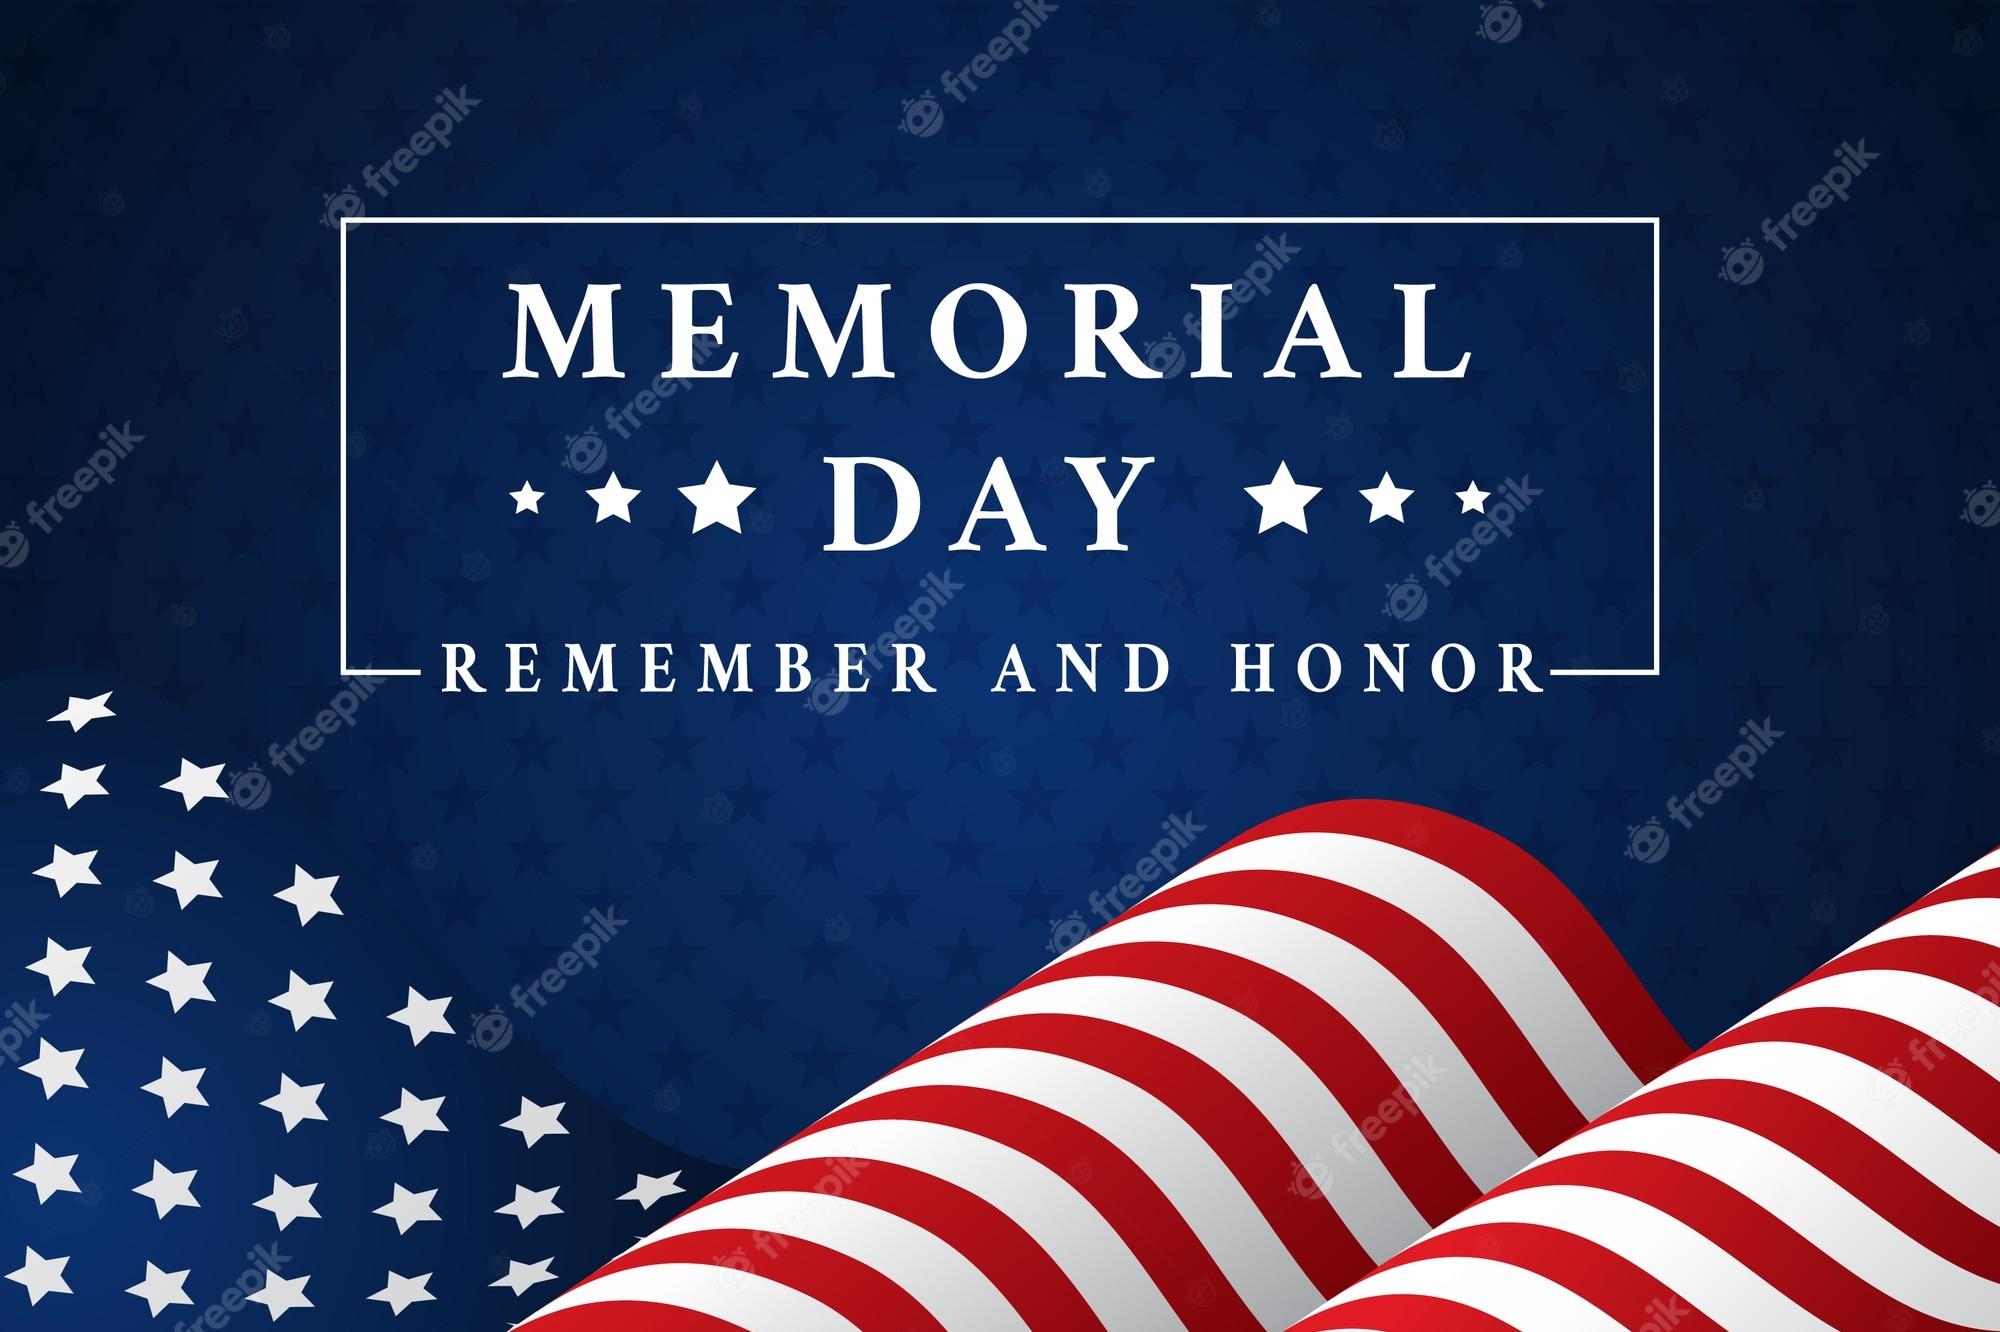 Memorial Day Background Images   Free Download on Freepik